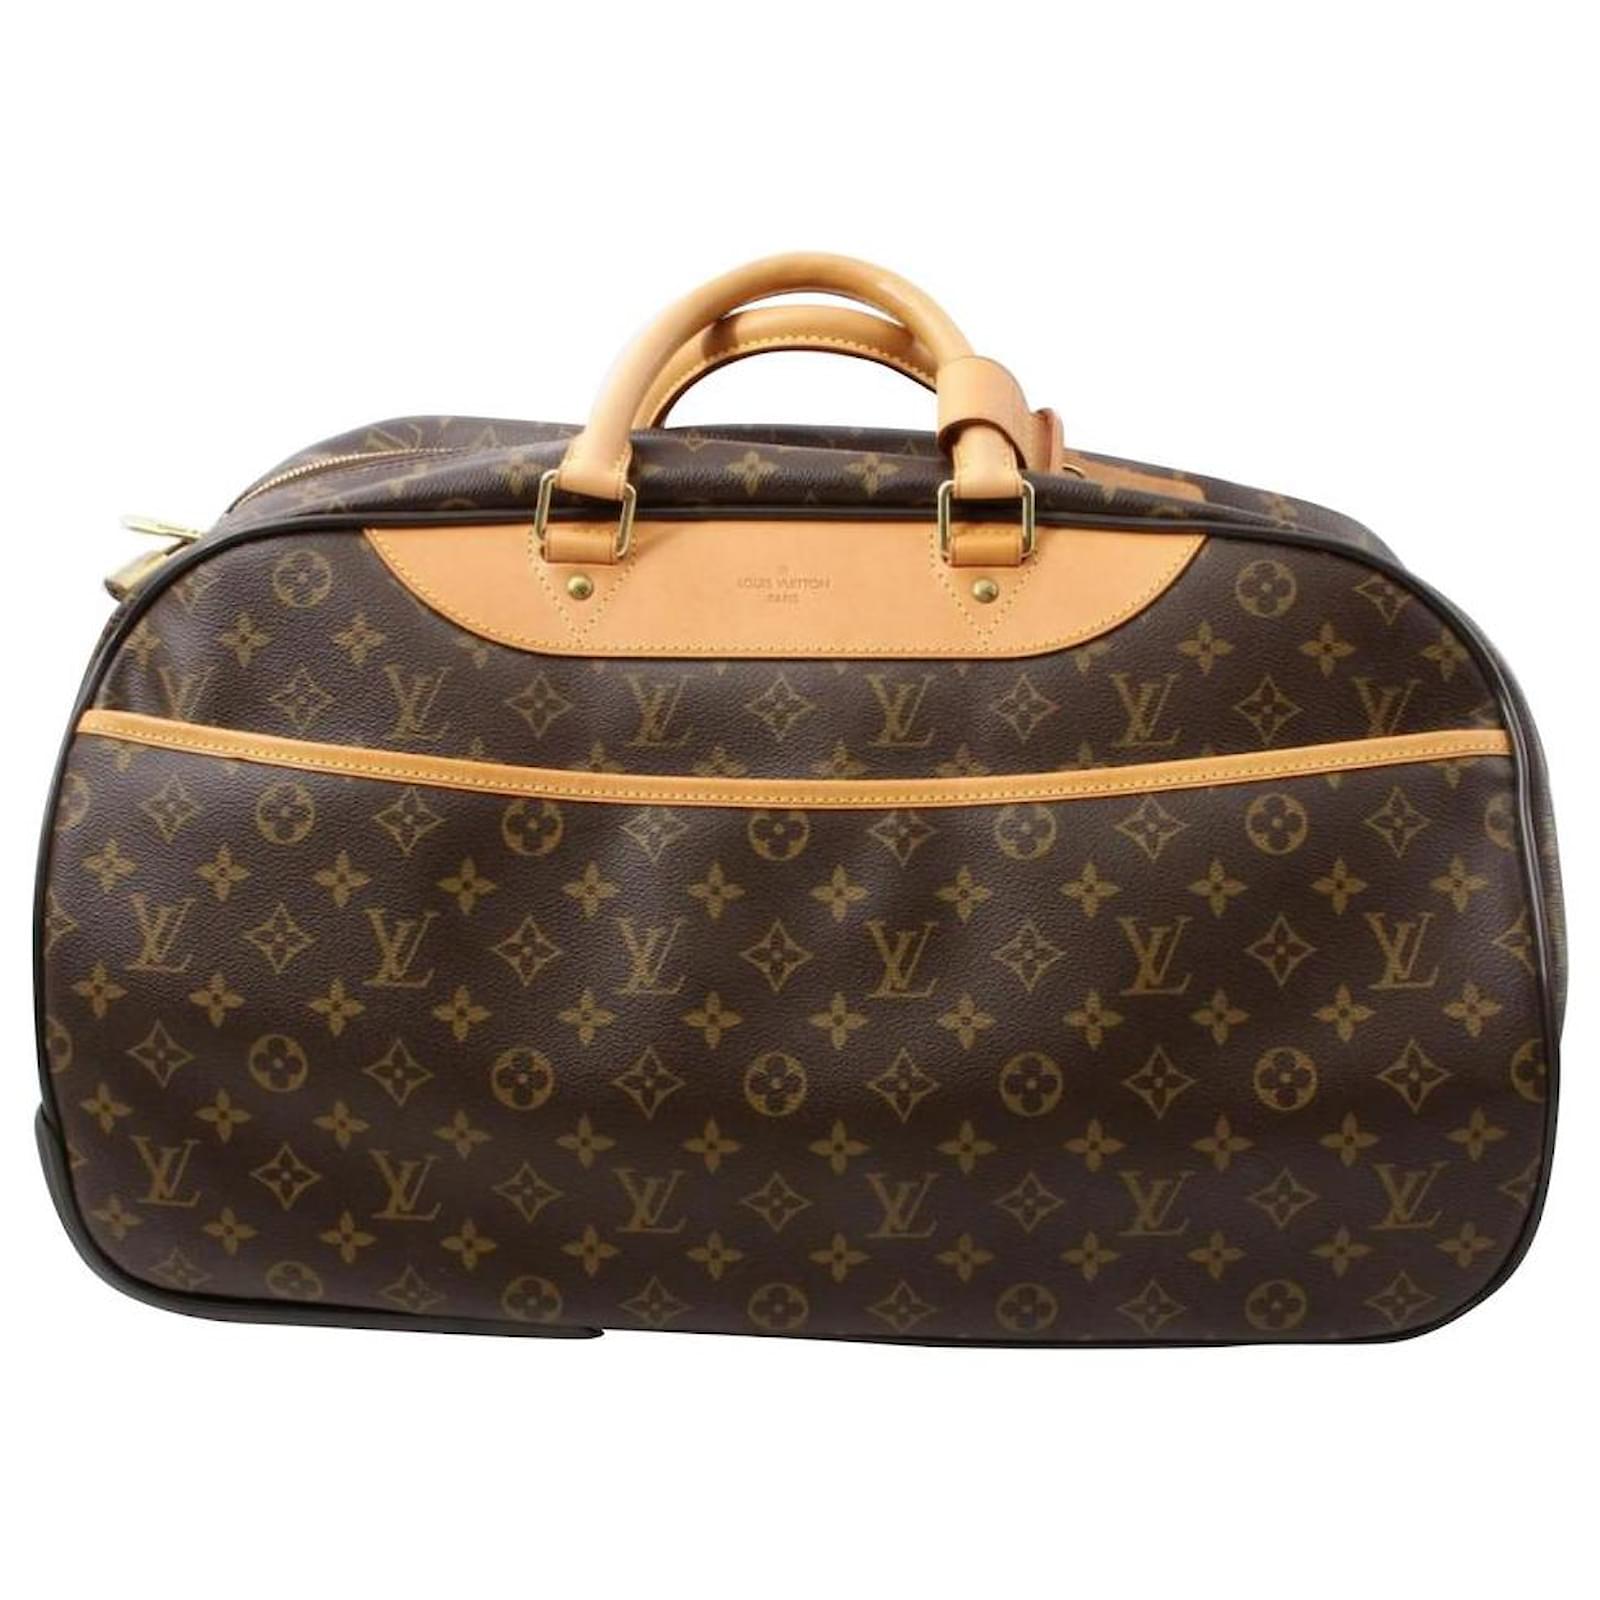 louis vuitton carry luggage